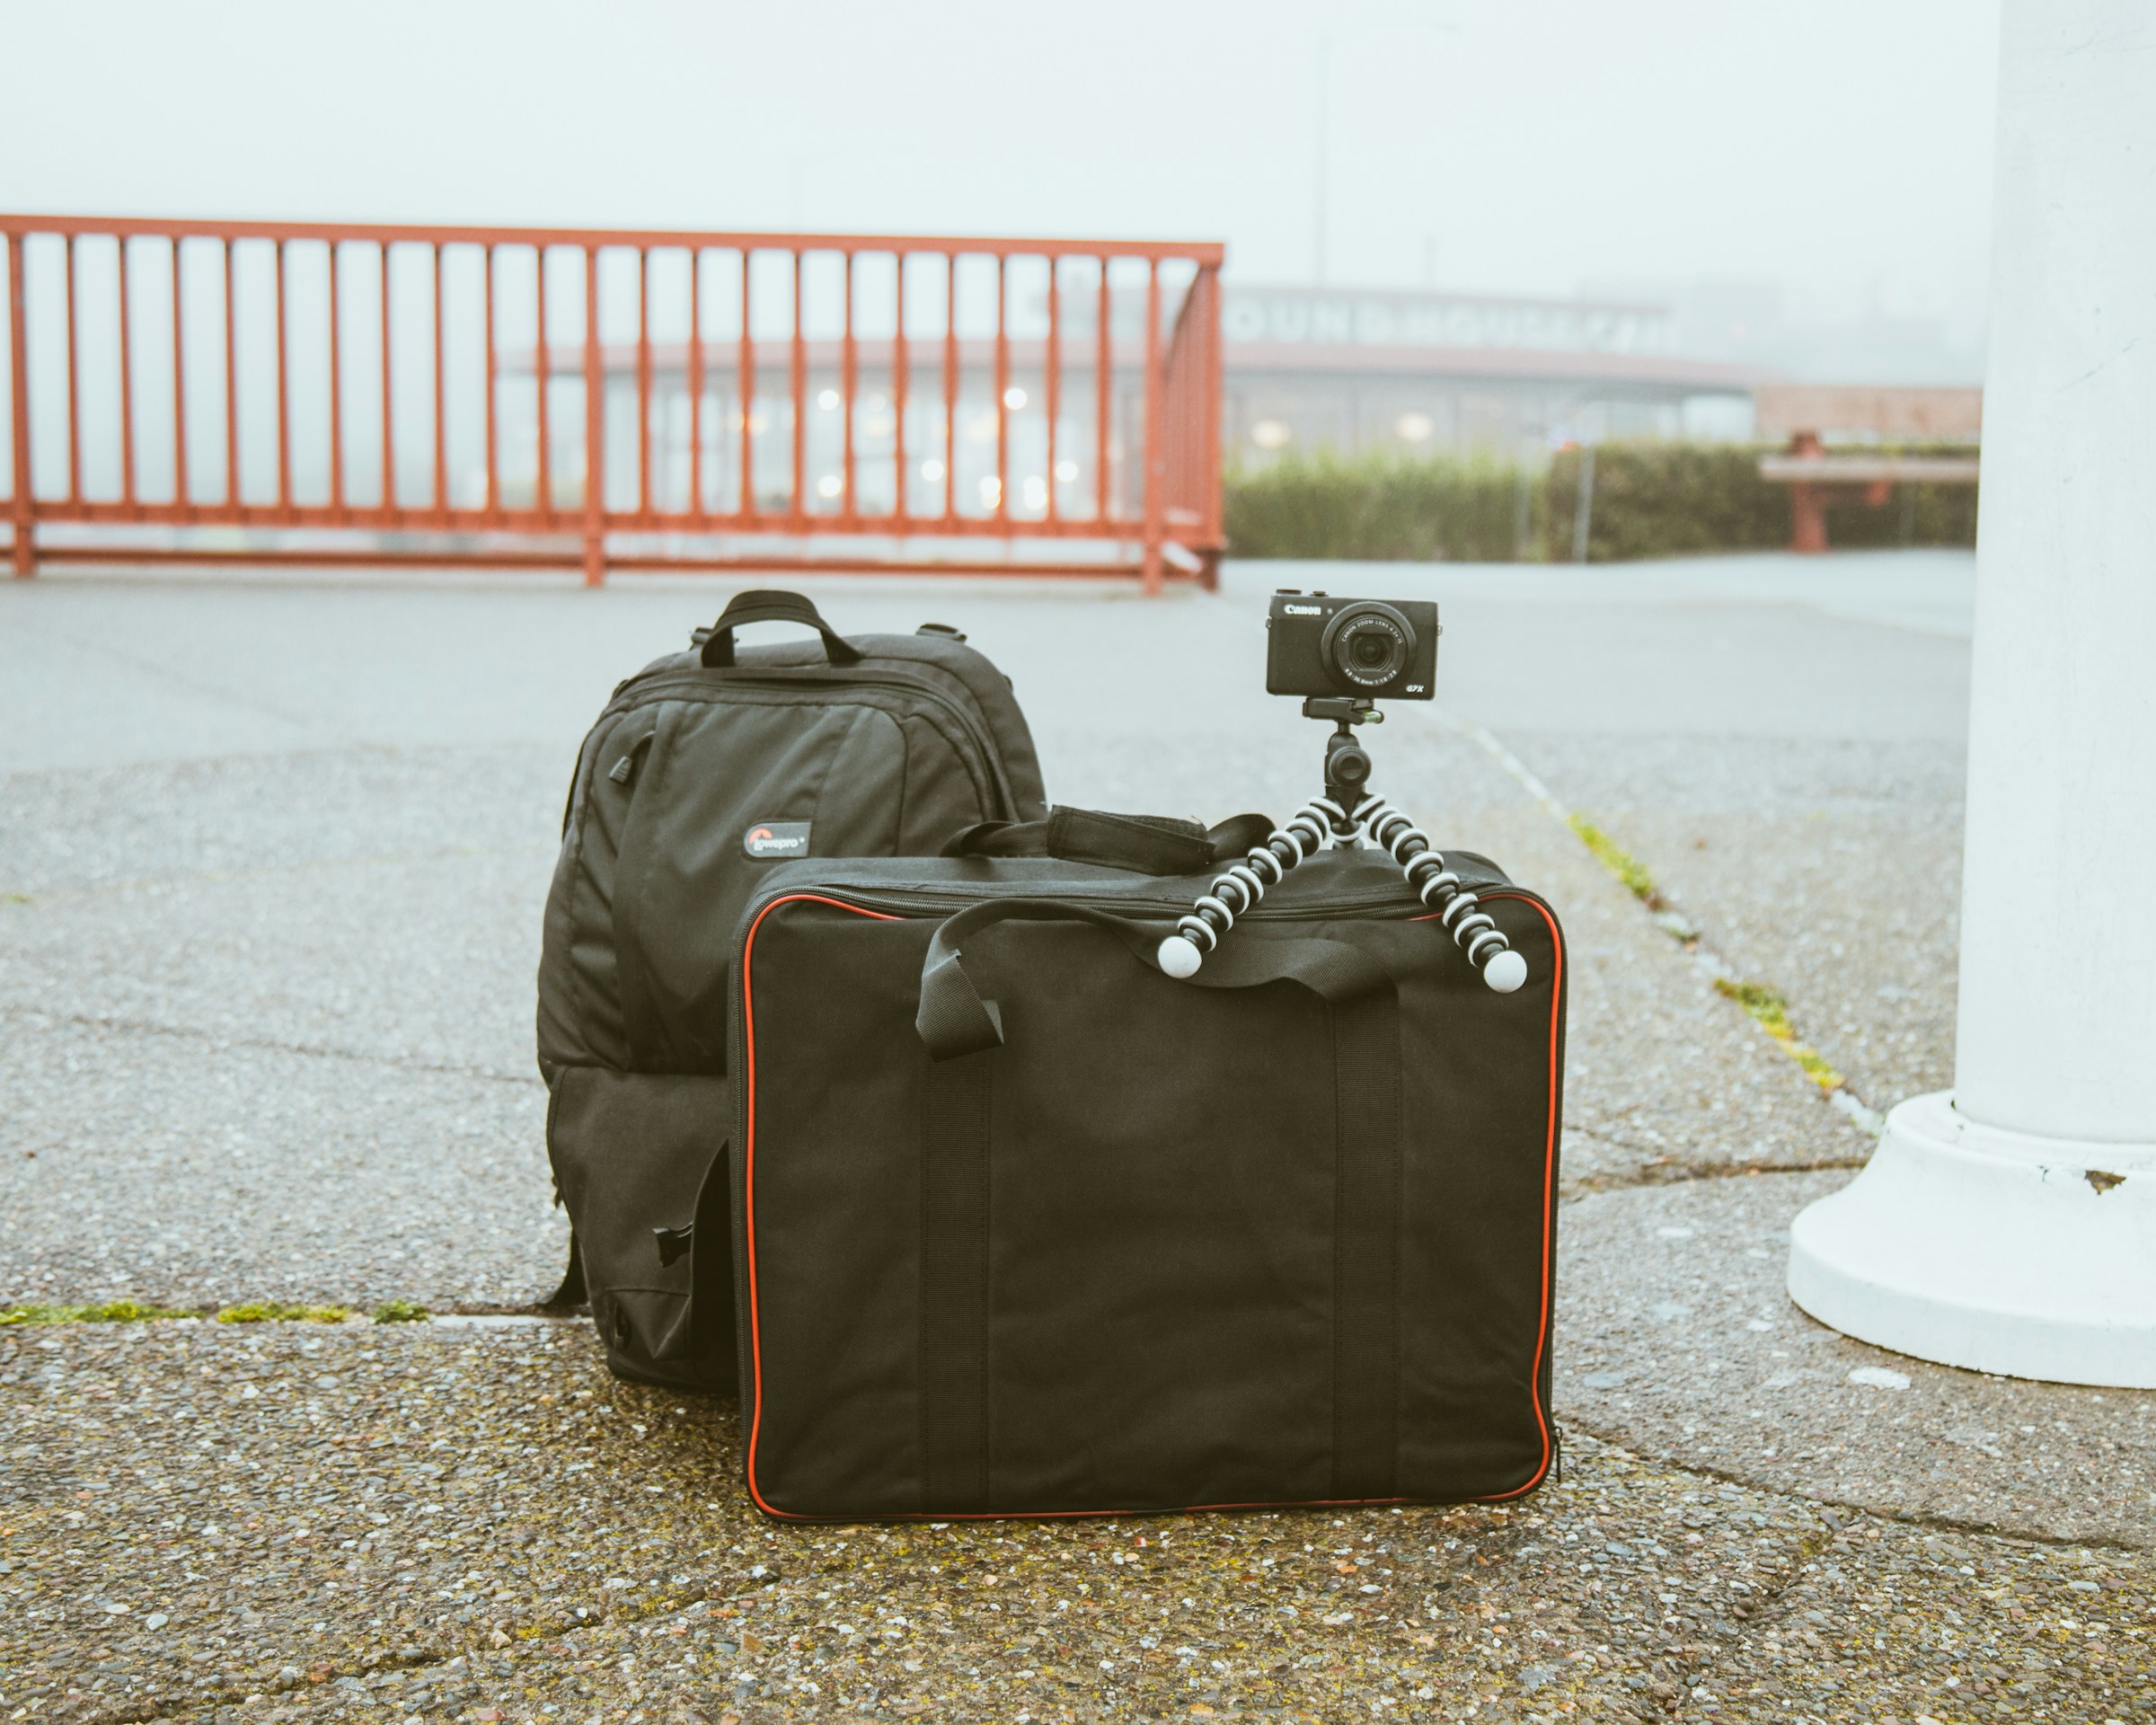 Packed bags with a camera | Source: Unsplash